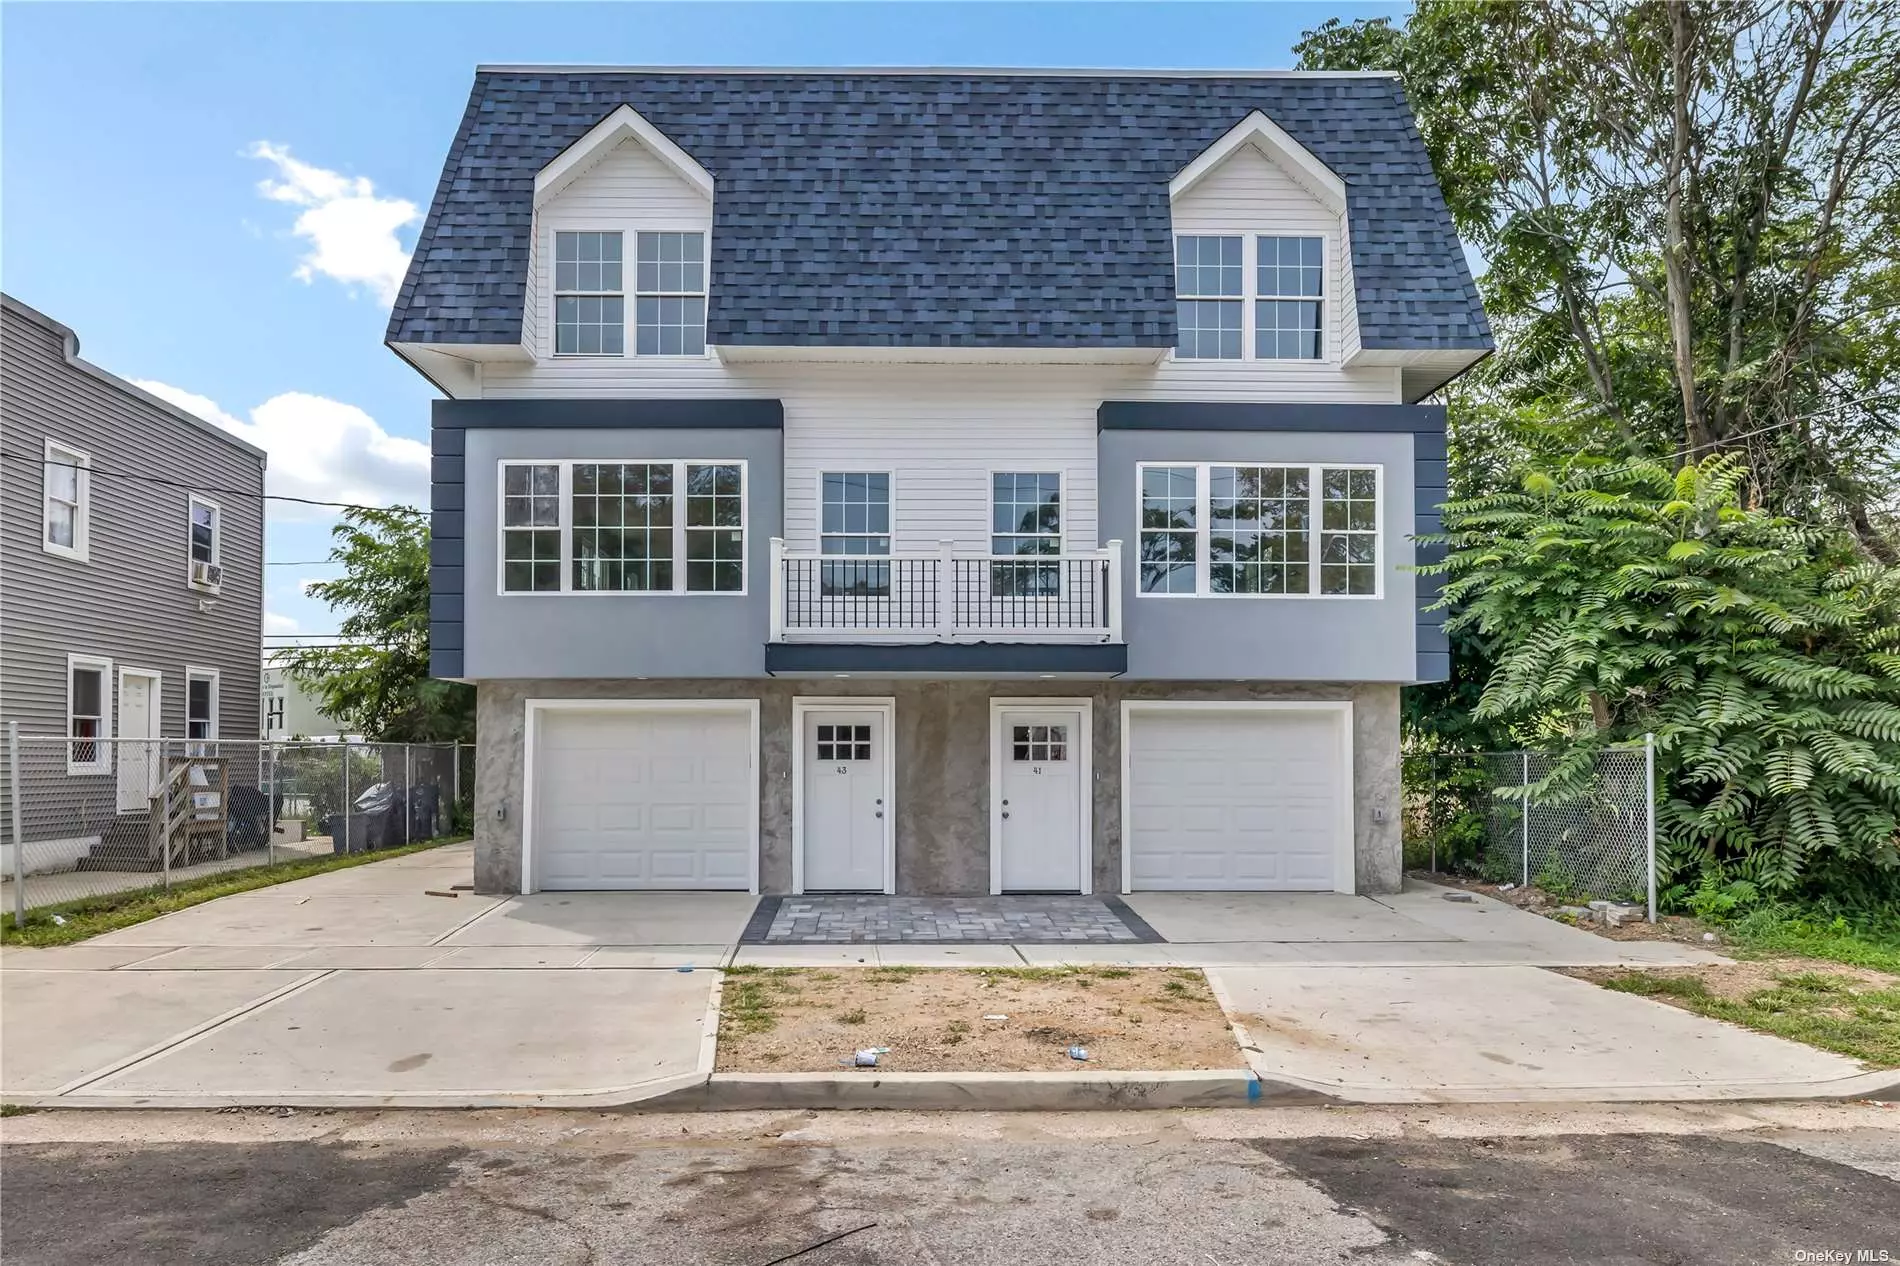 Semi-Attached Colonial home. 3 Bedrooms, 2 Full bathrooms. High efficiency home with low taxes. Hardwood flooring, recessed LED lighting, High efficiency Navien Heating system, Central air conditioning, tile bathrooms, Granite kitchen with stainless steel appliances. Call today!